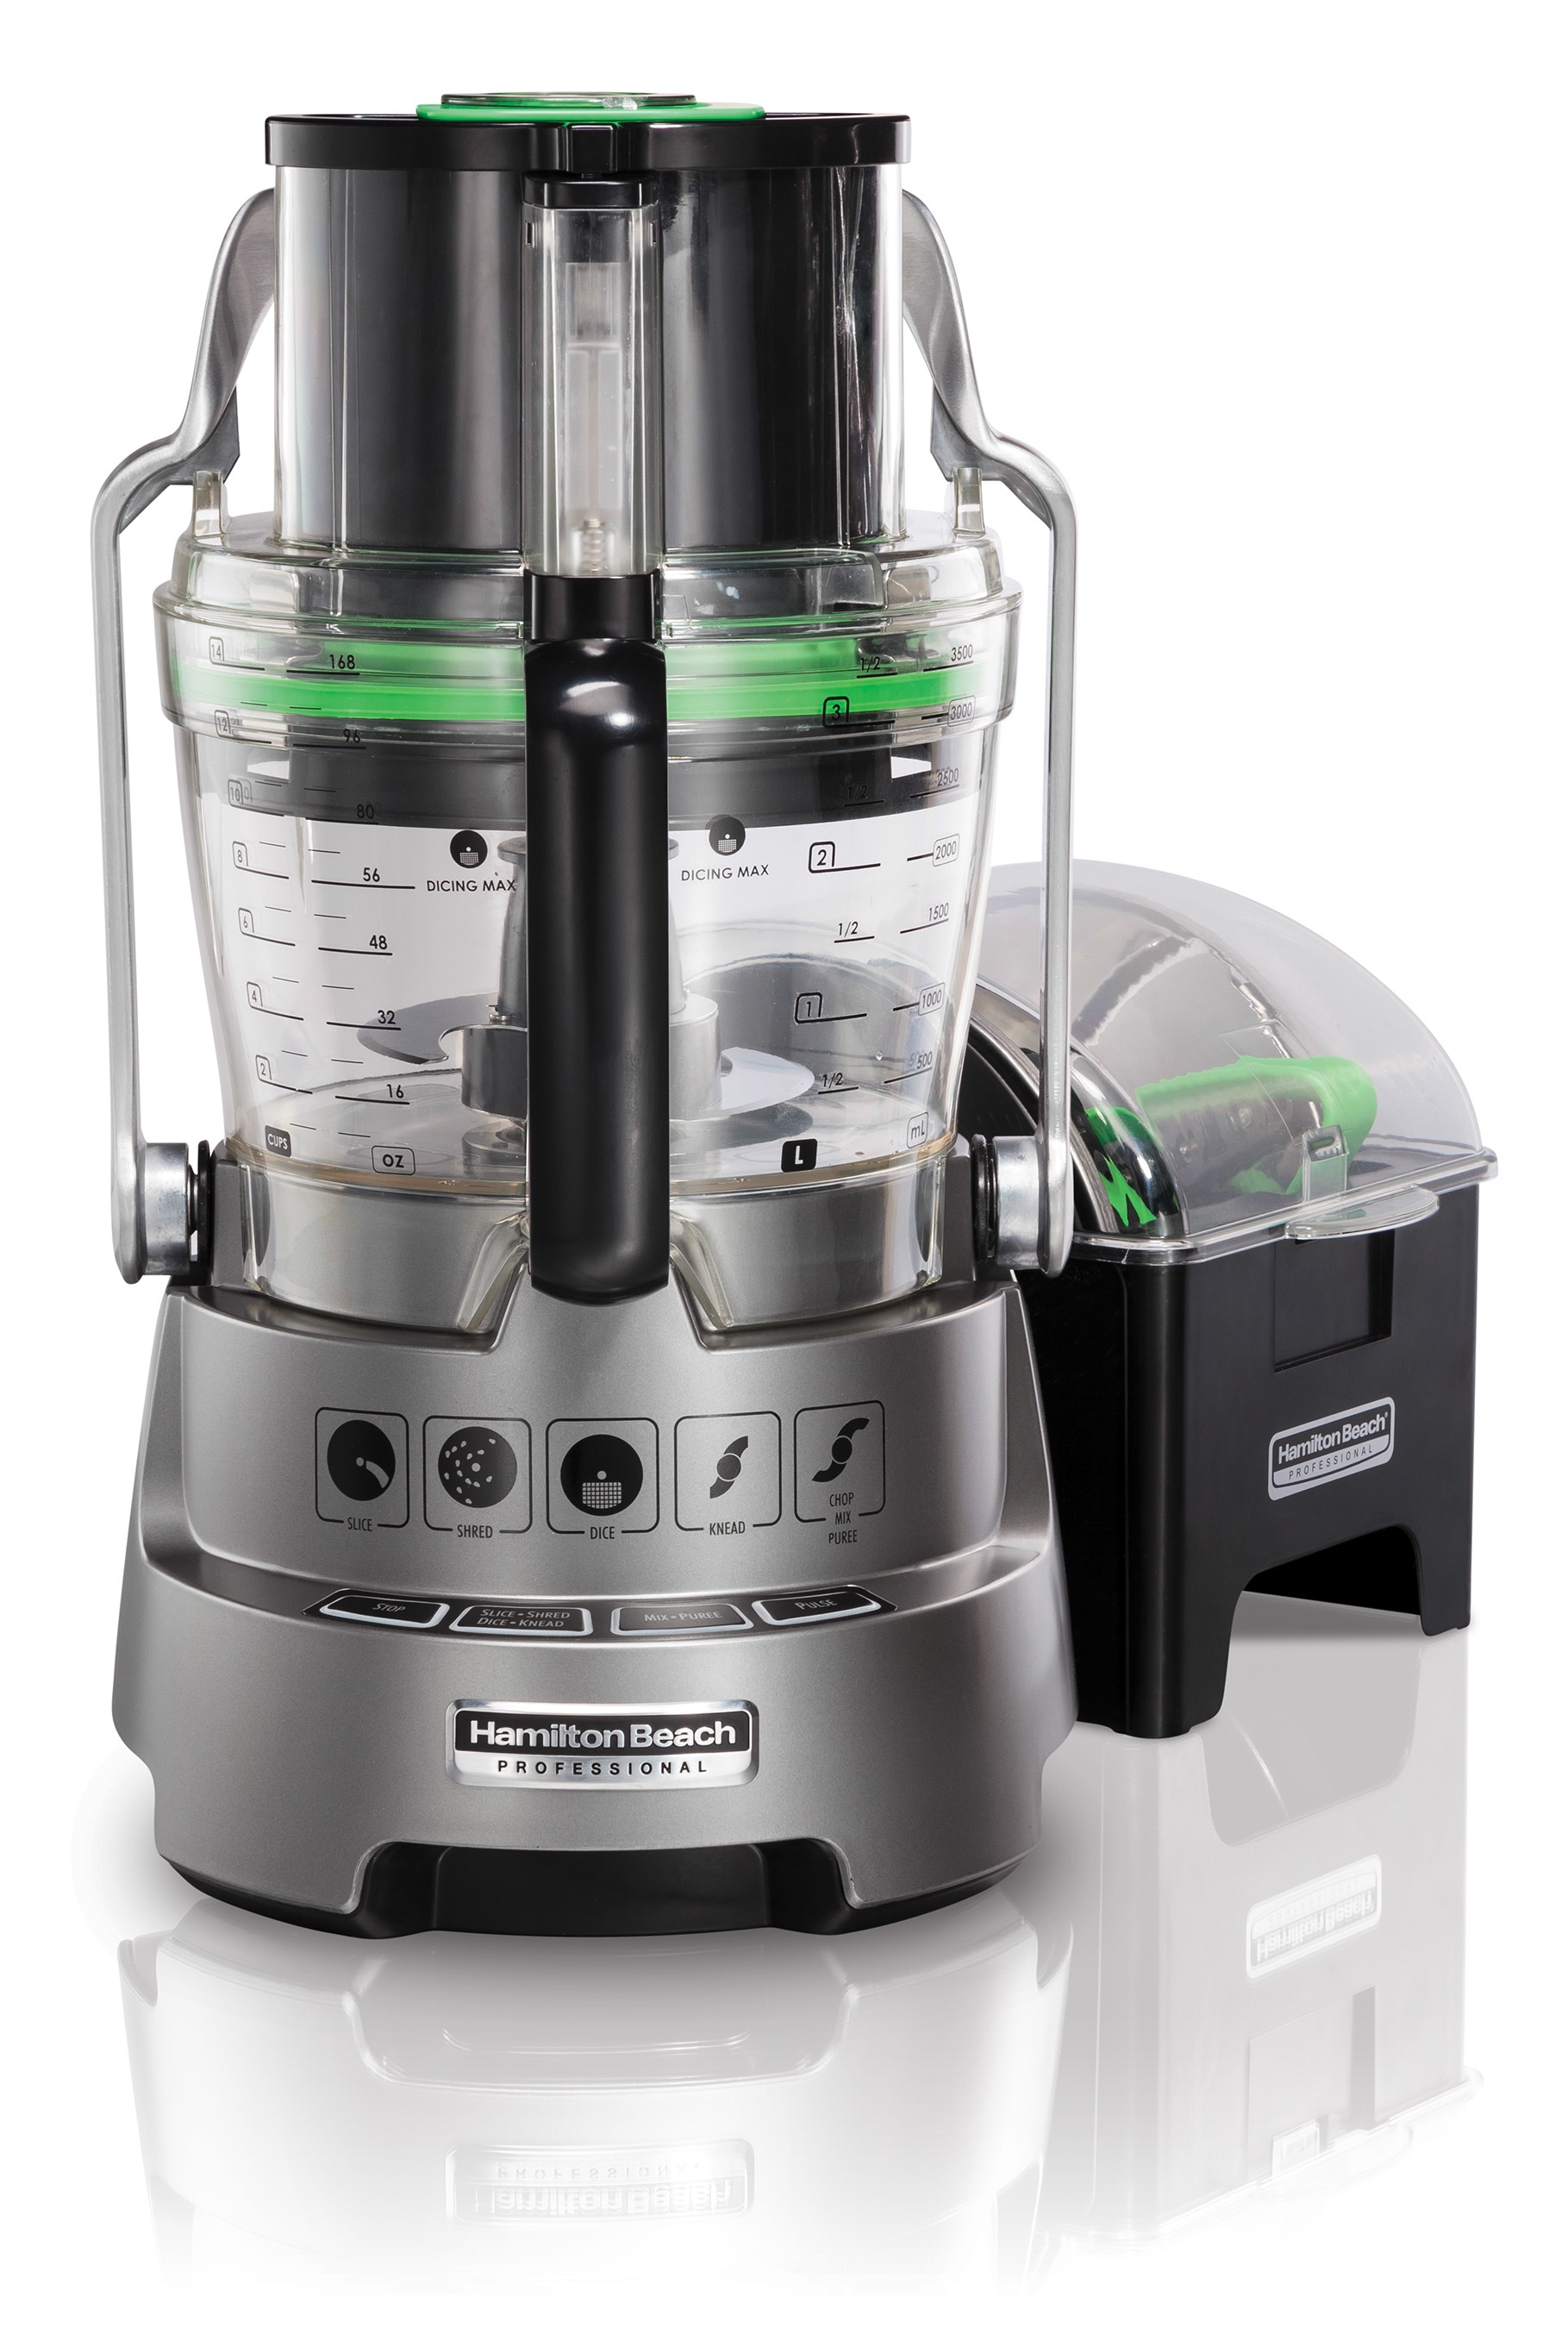 Hamilton Beach 12 Cup Stack and Snap Food Processor review